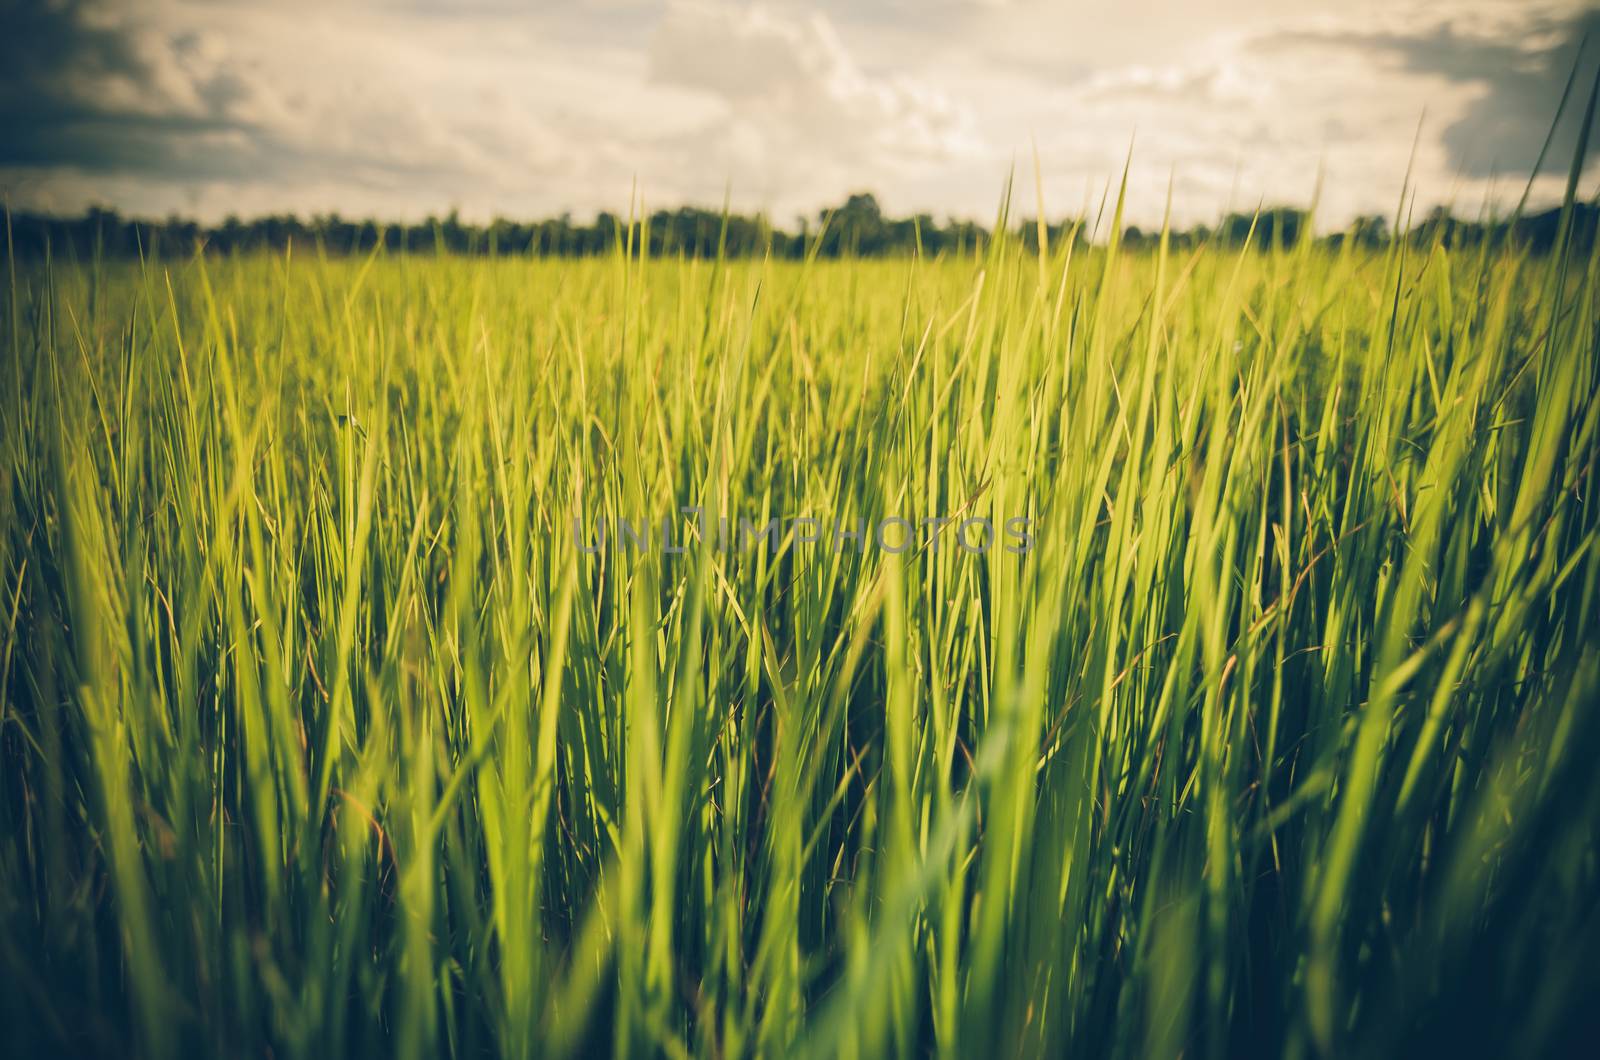 Green grass meadow field in the rice field Thailand background vintage